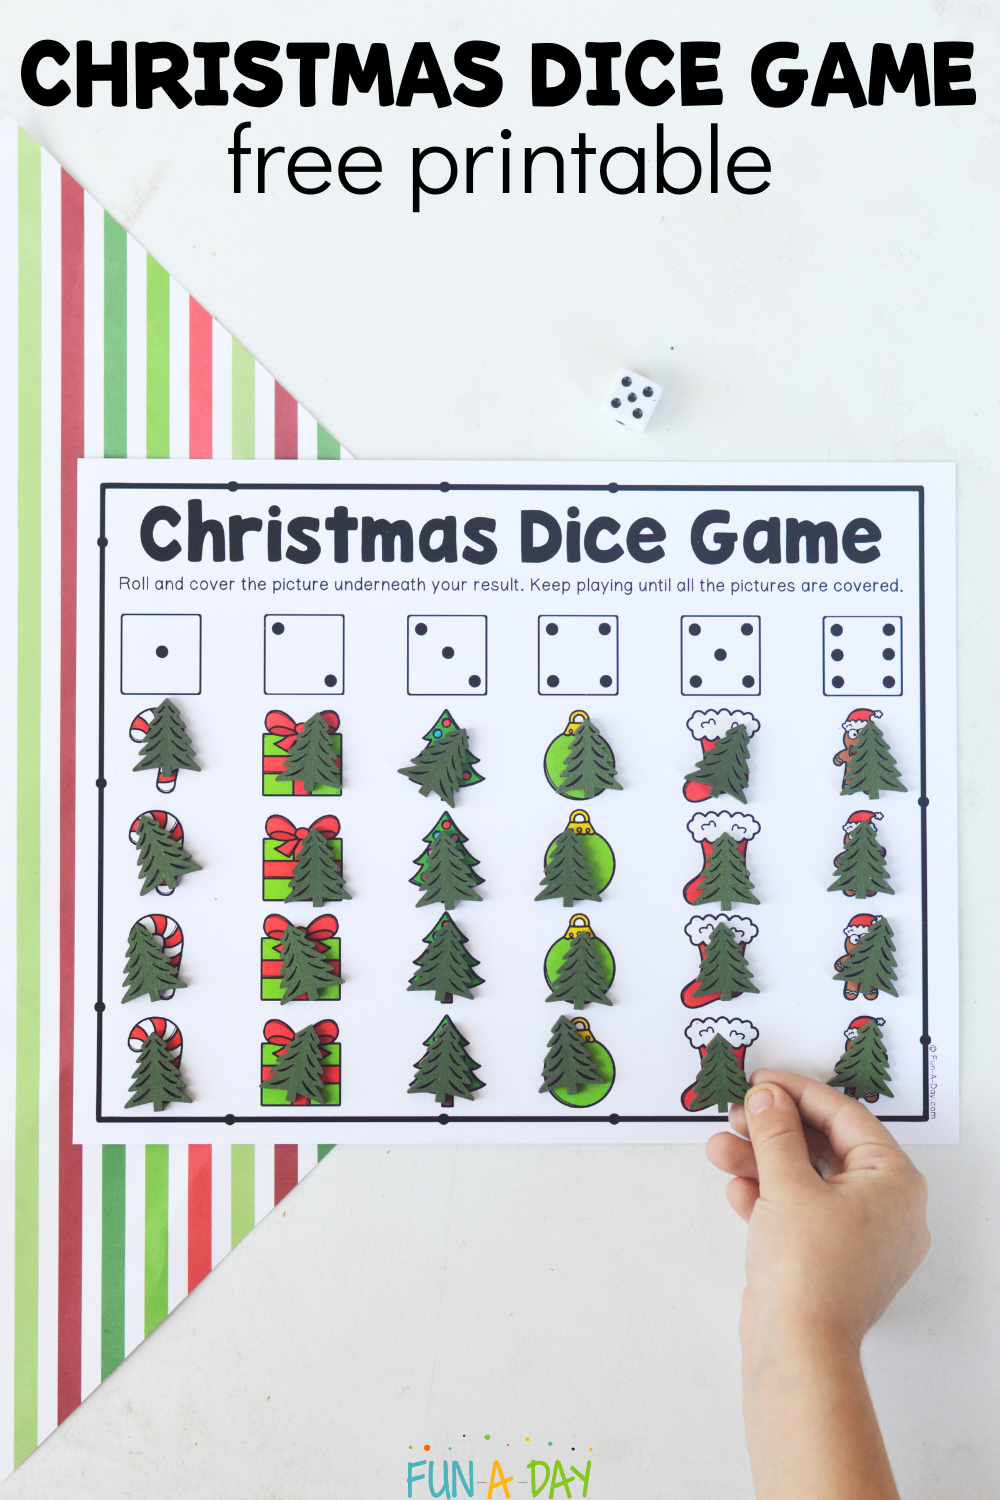 child placing manipulatives on printable Christmas game with text that reads Christmas dice game free printable